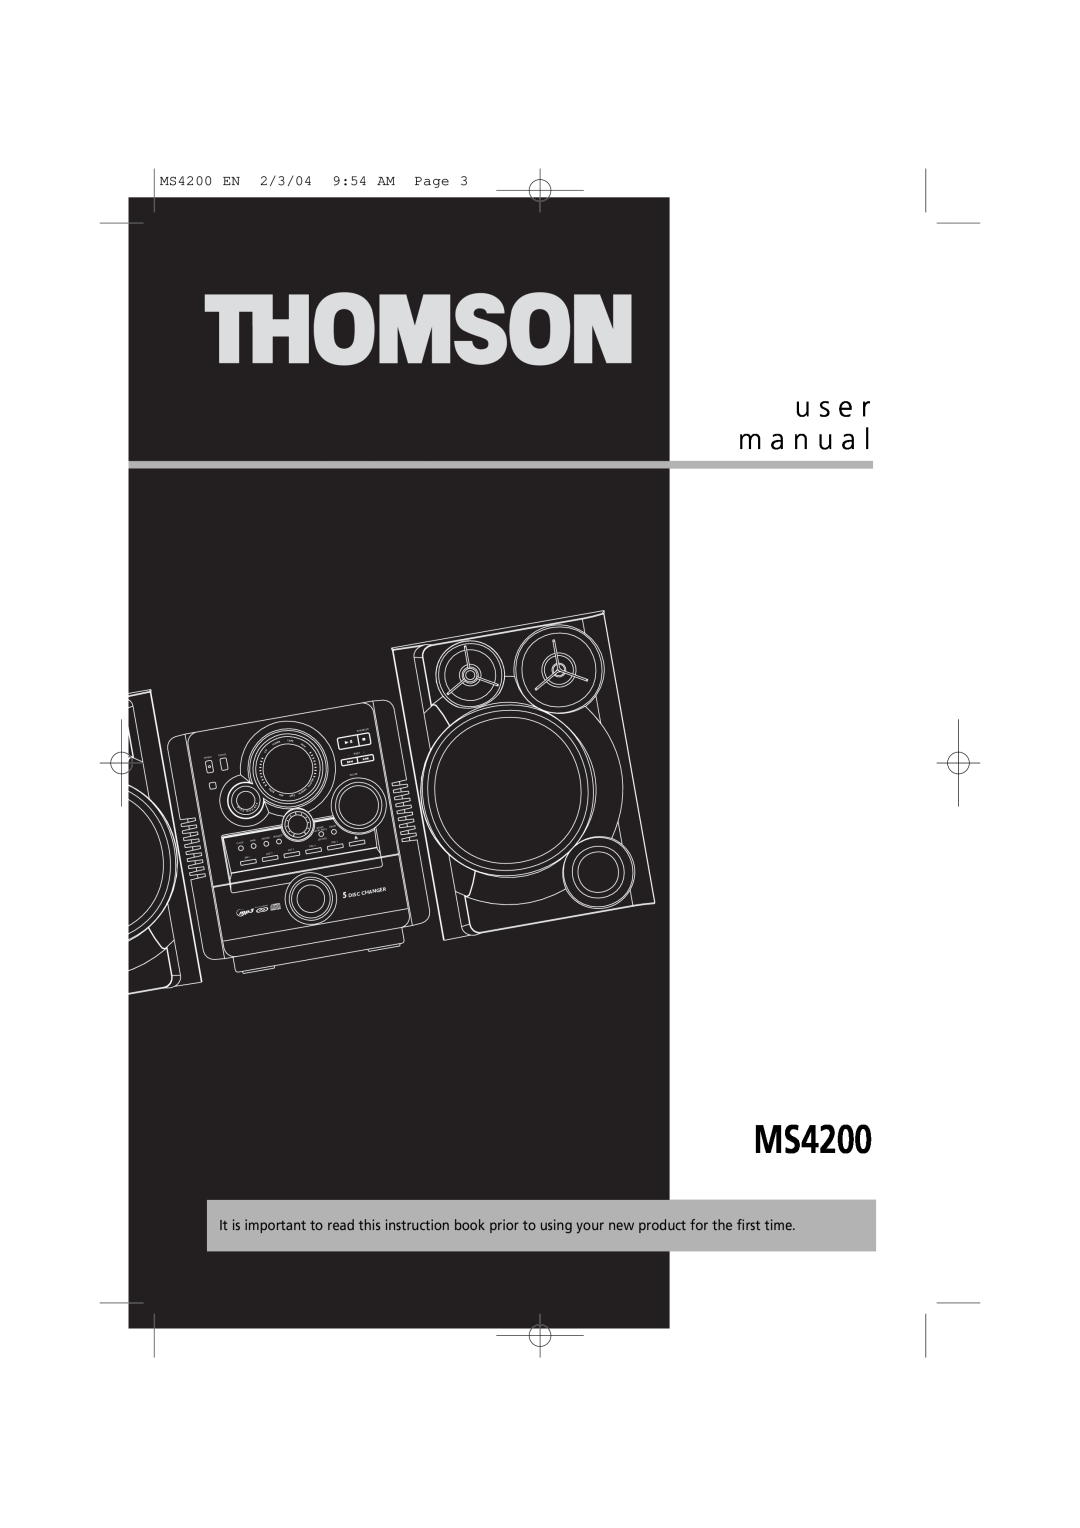 Technicolor - Thomson u s e r m a n u a l, MS4200 EN 2/3/04 9 54 AM Page, 5DISC, Changer, Tune/Prese, Uner, Tape, Jazz 